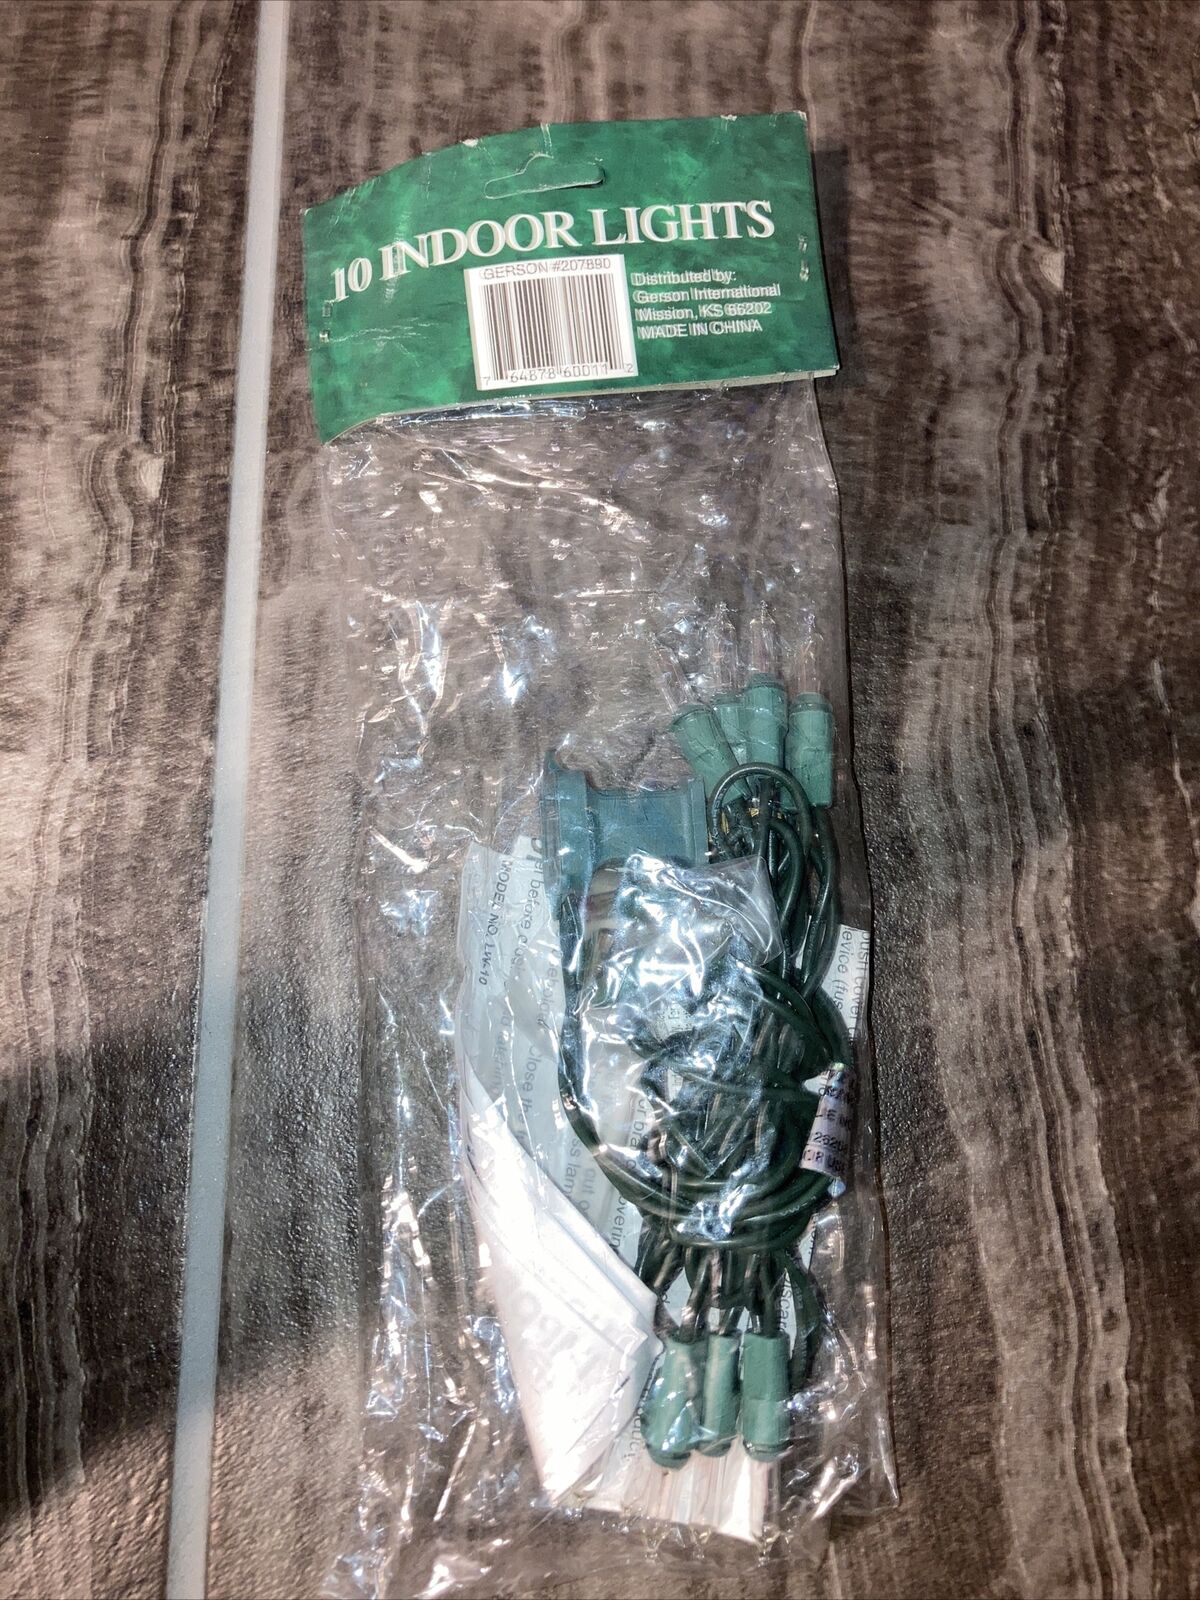 10 Indoor Christmas Lights, Green Cord, 5 Feet Total Length, Steady Or Flash